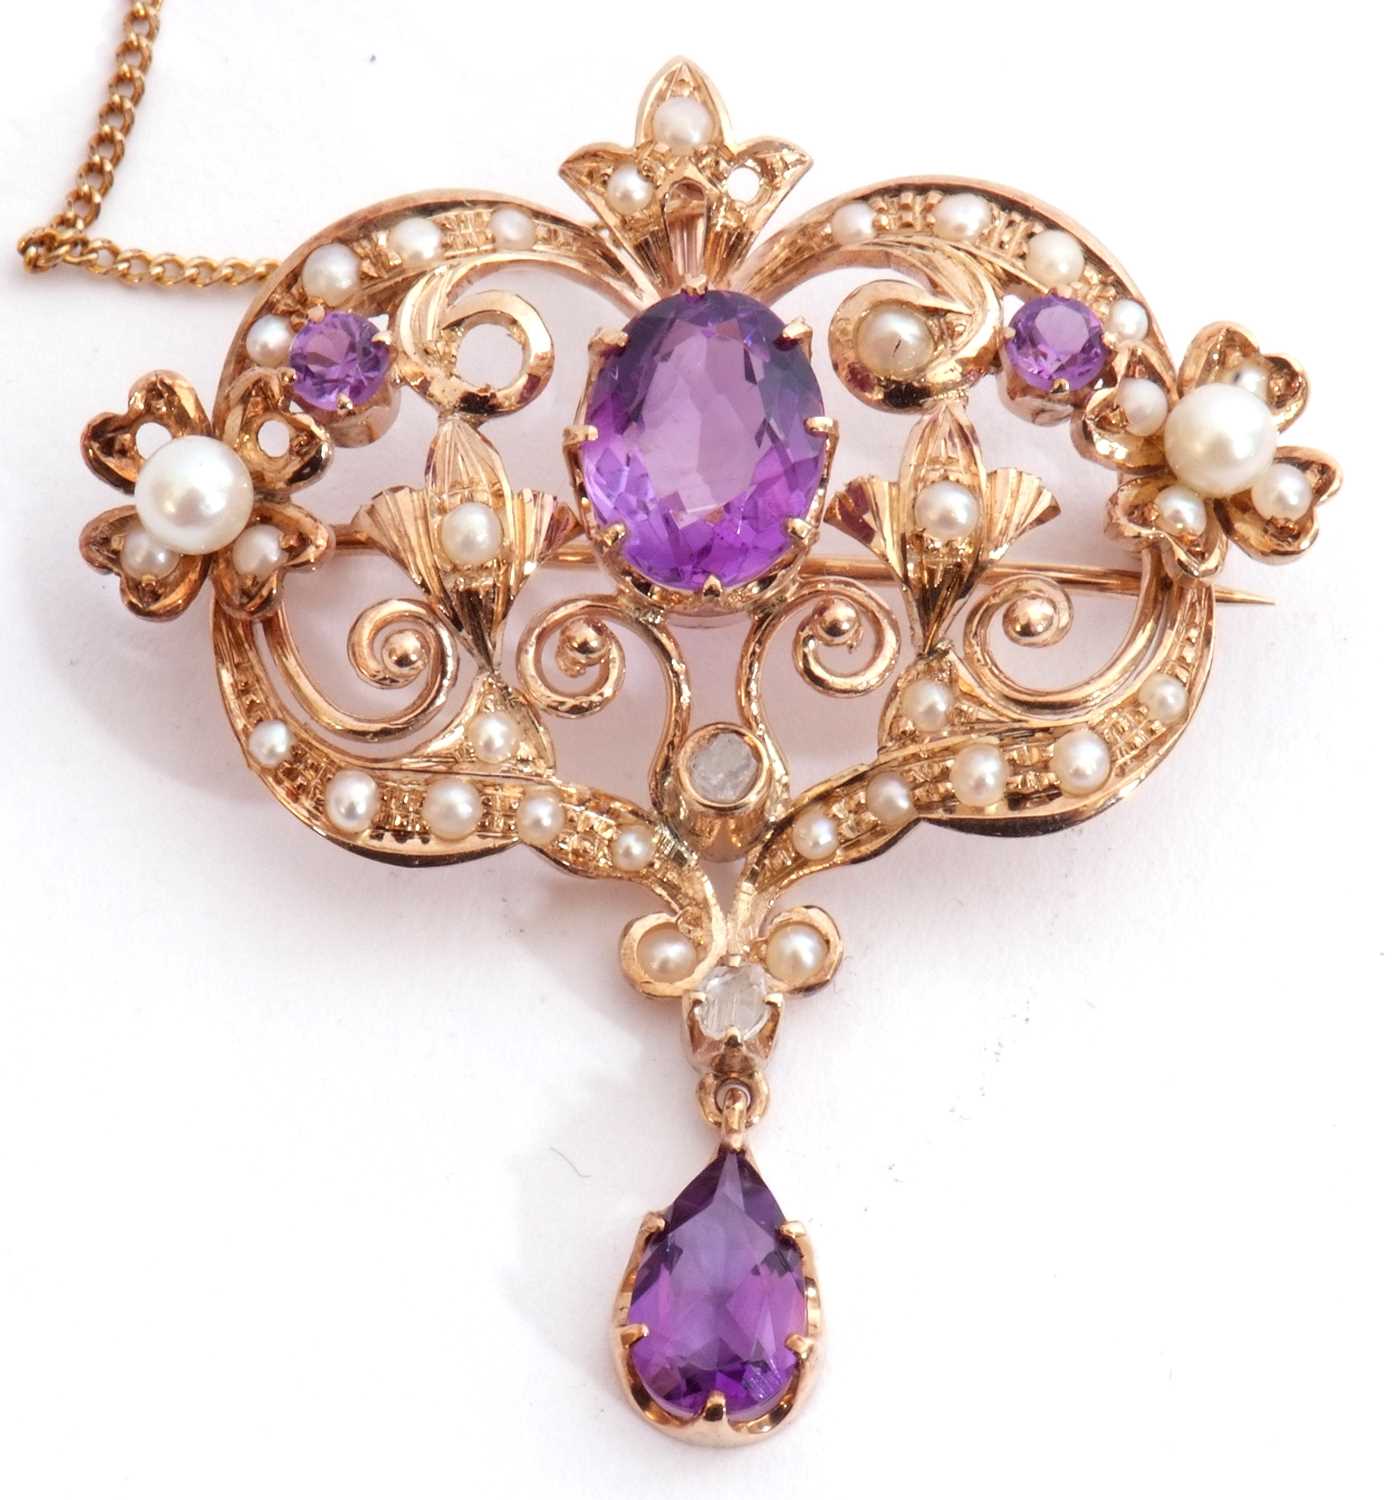 Amethyst, pearl and diamond open work brooch/pendant centring an oval faceted amethyst raised in - Image 4 of 4